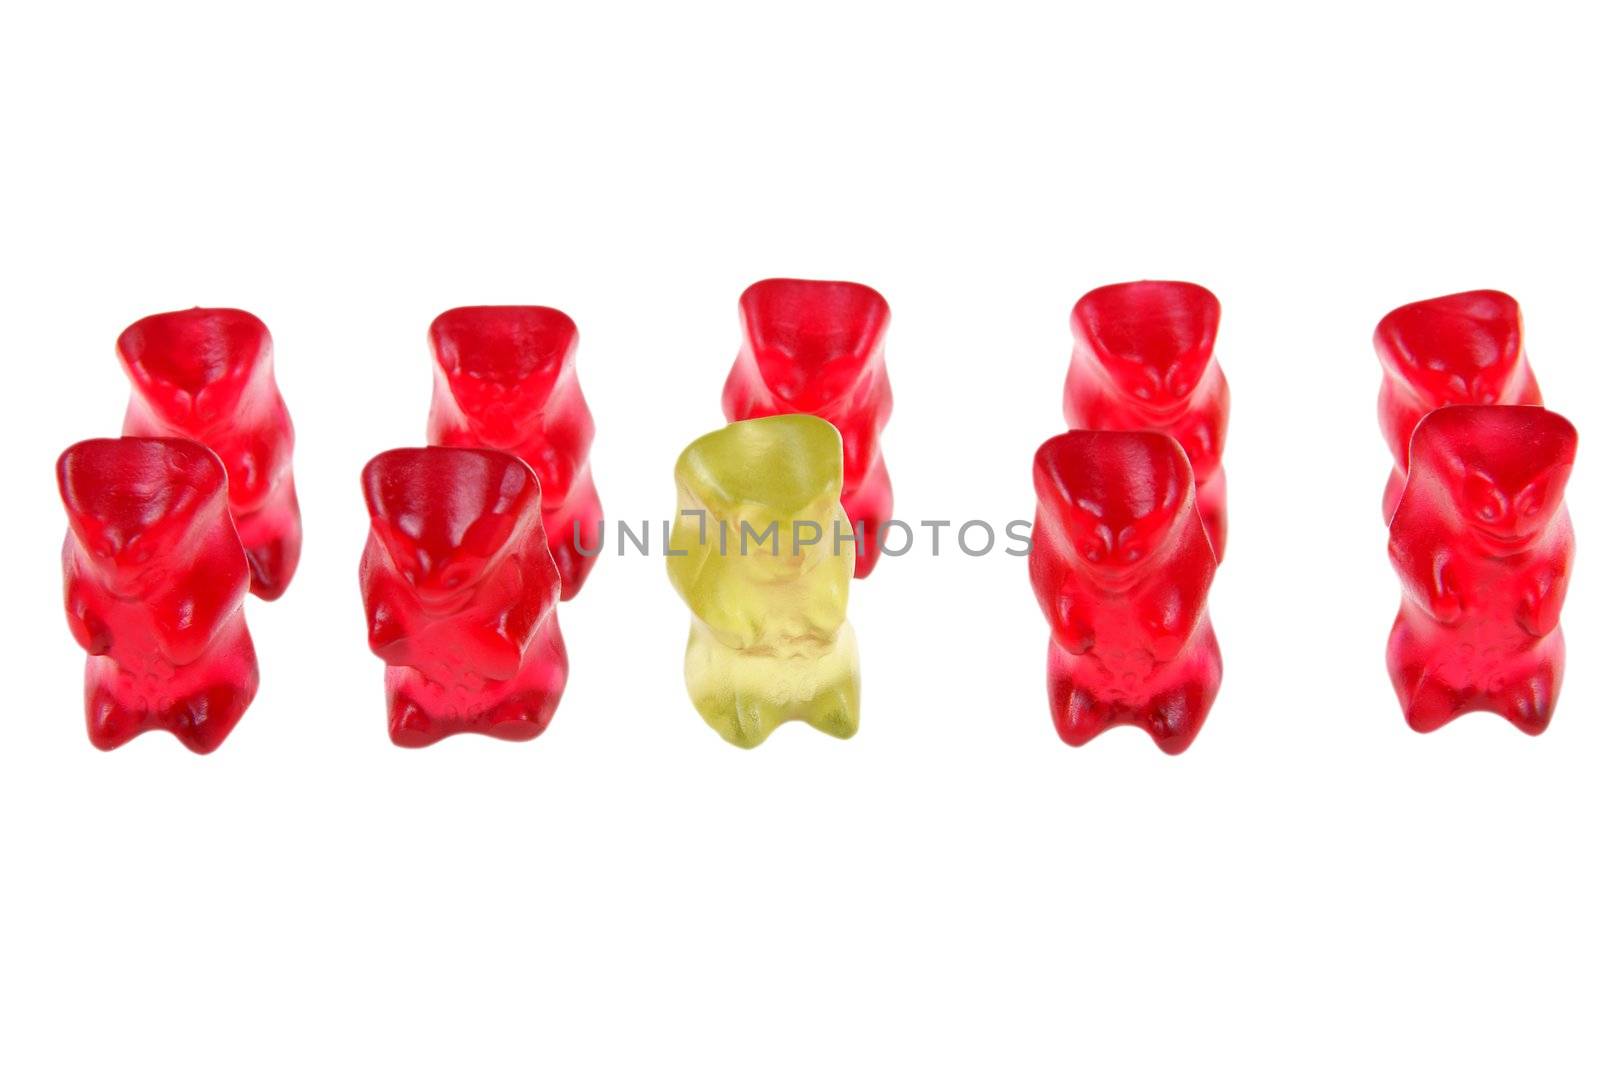 Gummy bears arragment as team isolated on white background